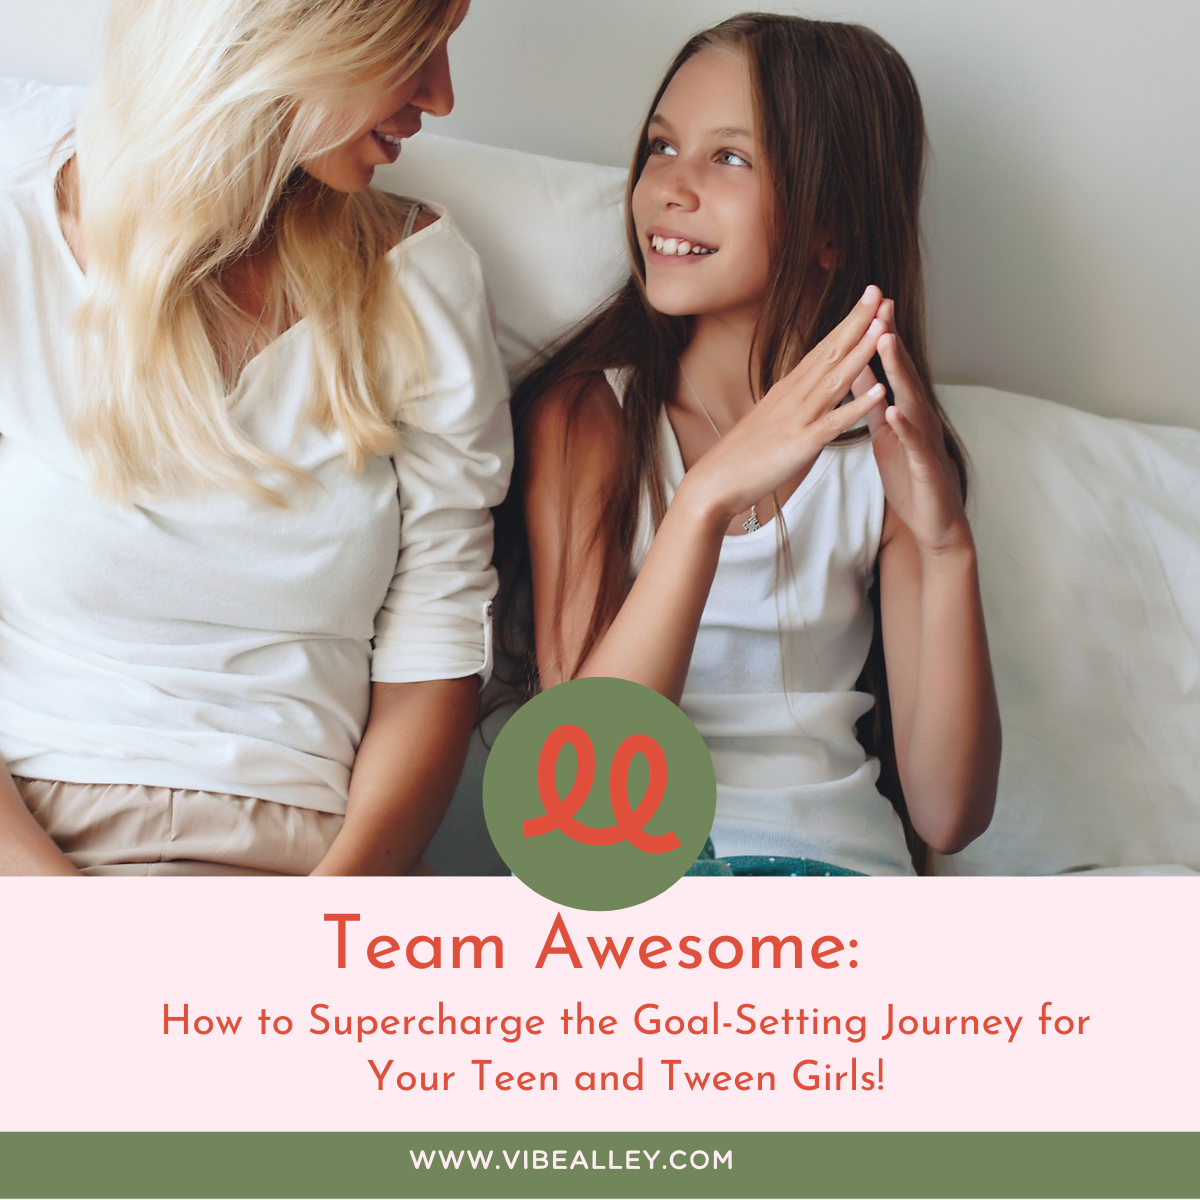 Team Awesome: How to Supercharge the Goal-Setting Journey for Your Teen and Tween Girls!